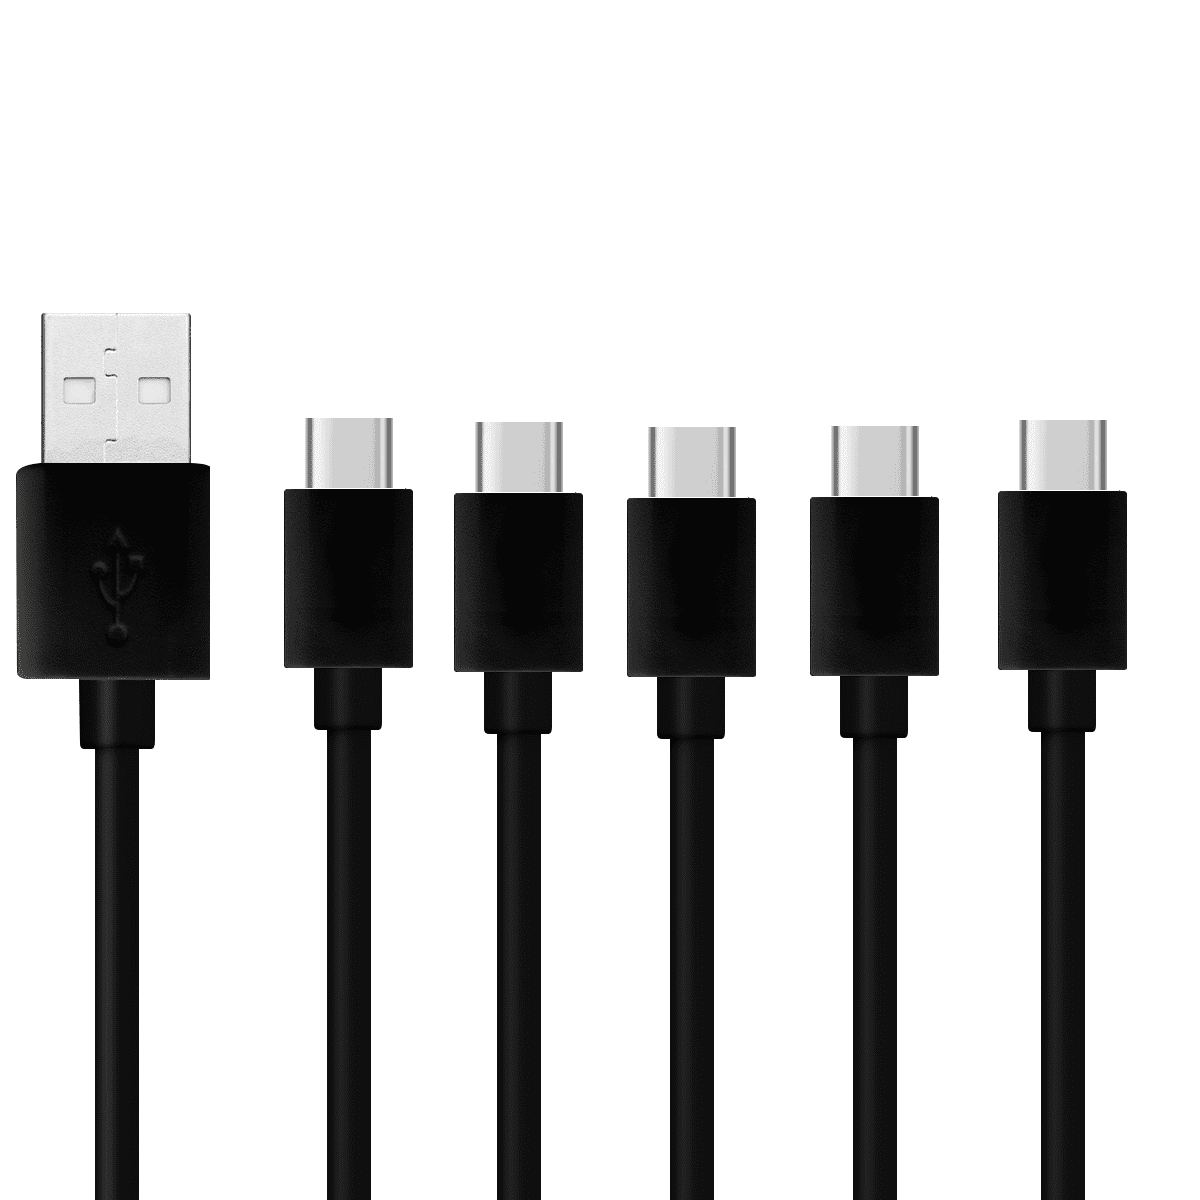 Fast Quick Charging MicroUSB Cable works with Alcatel Idol 4 is 5ft/1.5M allows fast charging Speeds! 